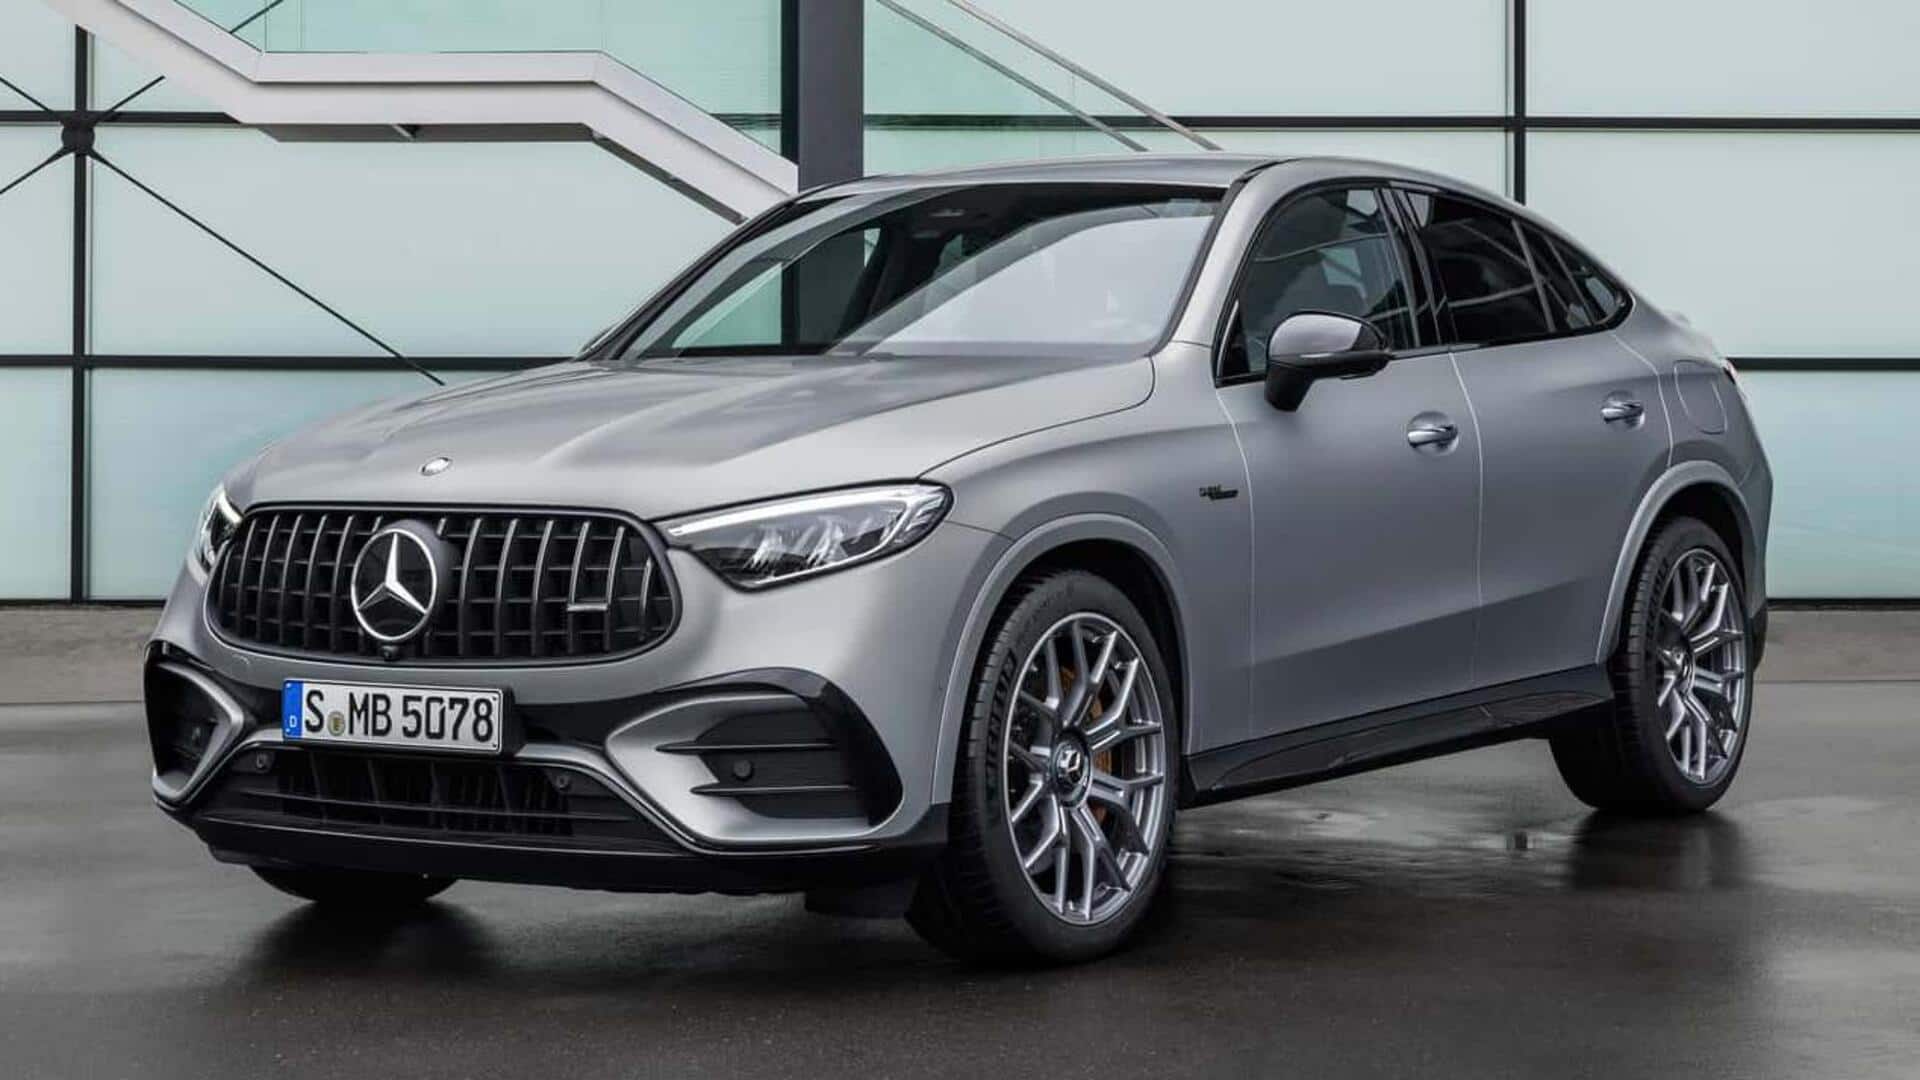 Mercedes-AMG GLC63 S E Performance, GLC43 Coupe revealed: Check features